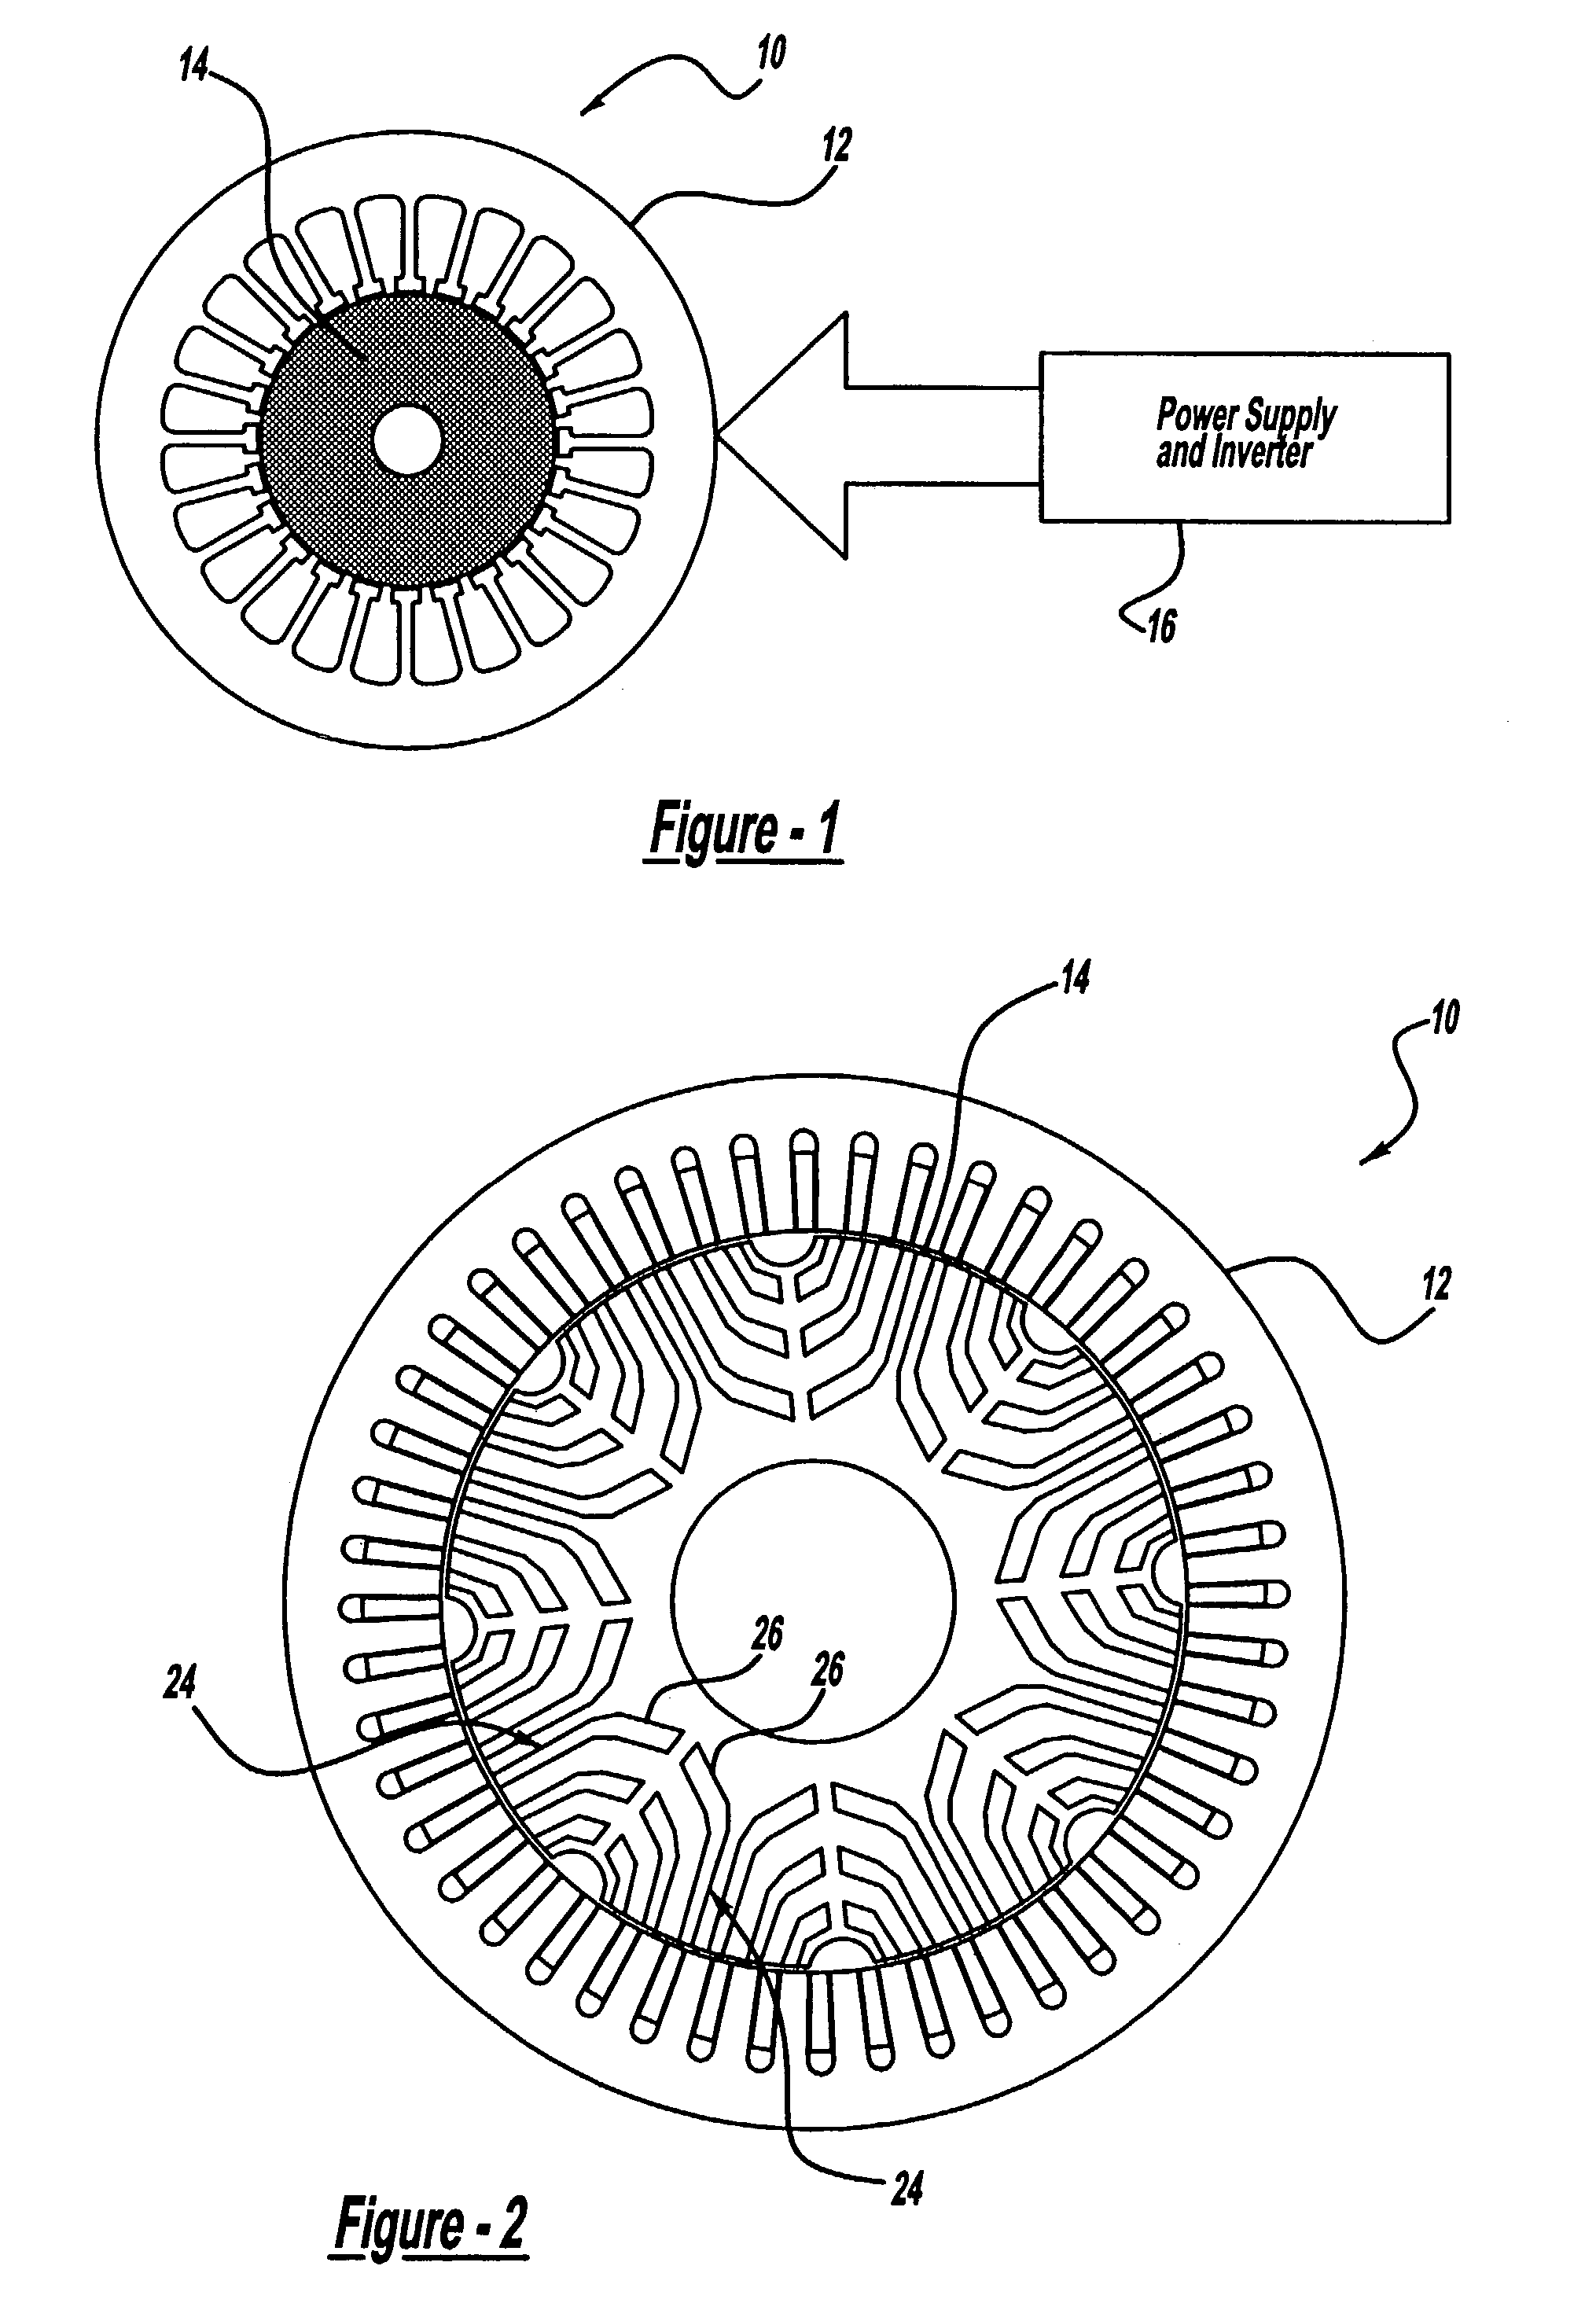 Method of fabricating a rotor